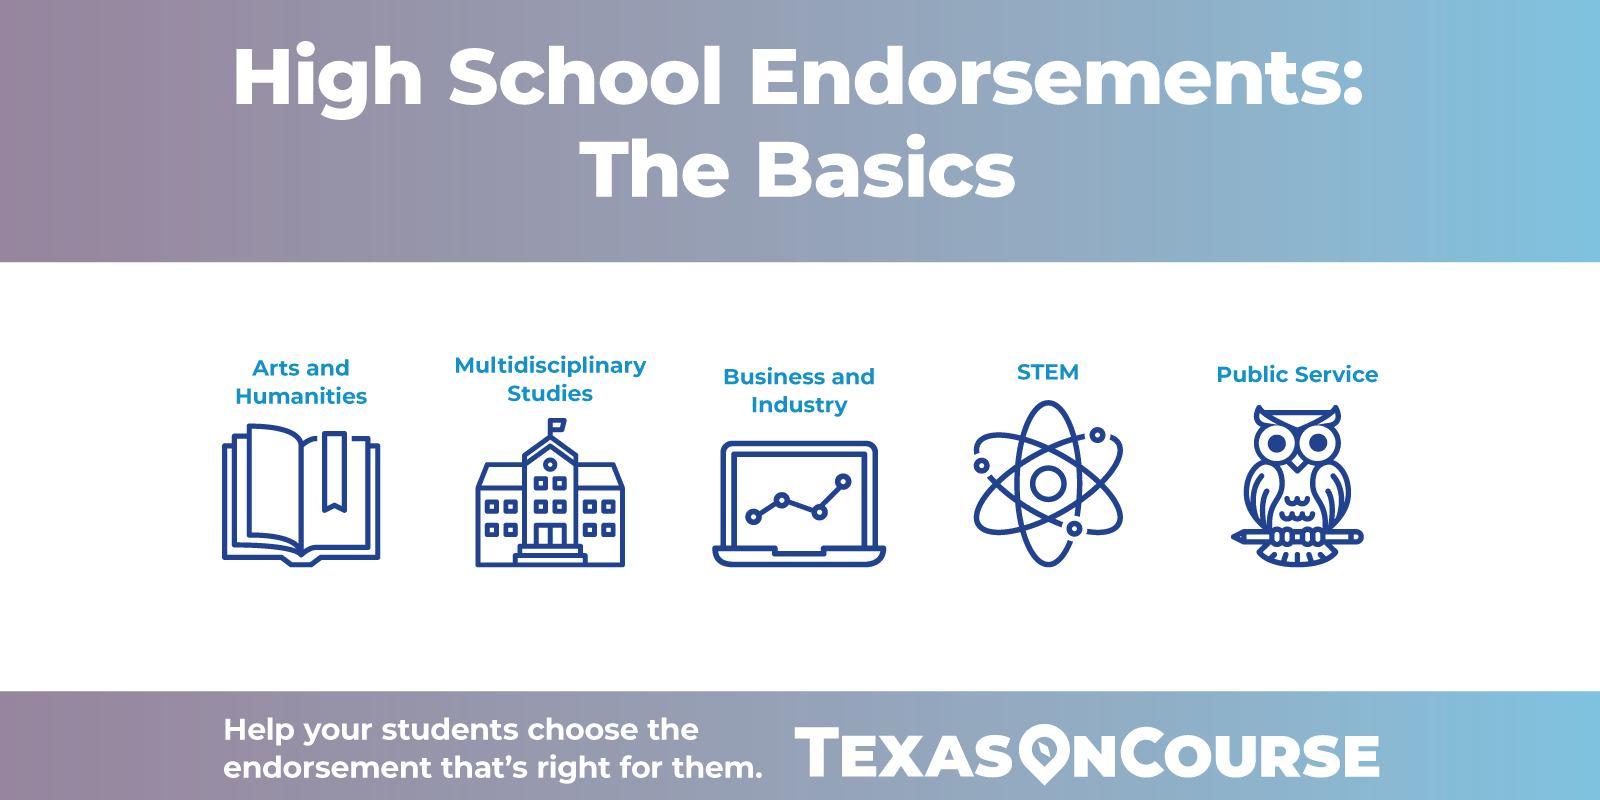 High school endorsements: the basics. Icons showing arts and humanities, multidisciplinary studies, business and industry, STEM, and public service. Help your students choose the endorsement that's right for them.